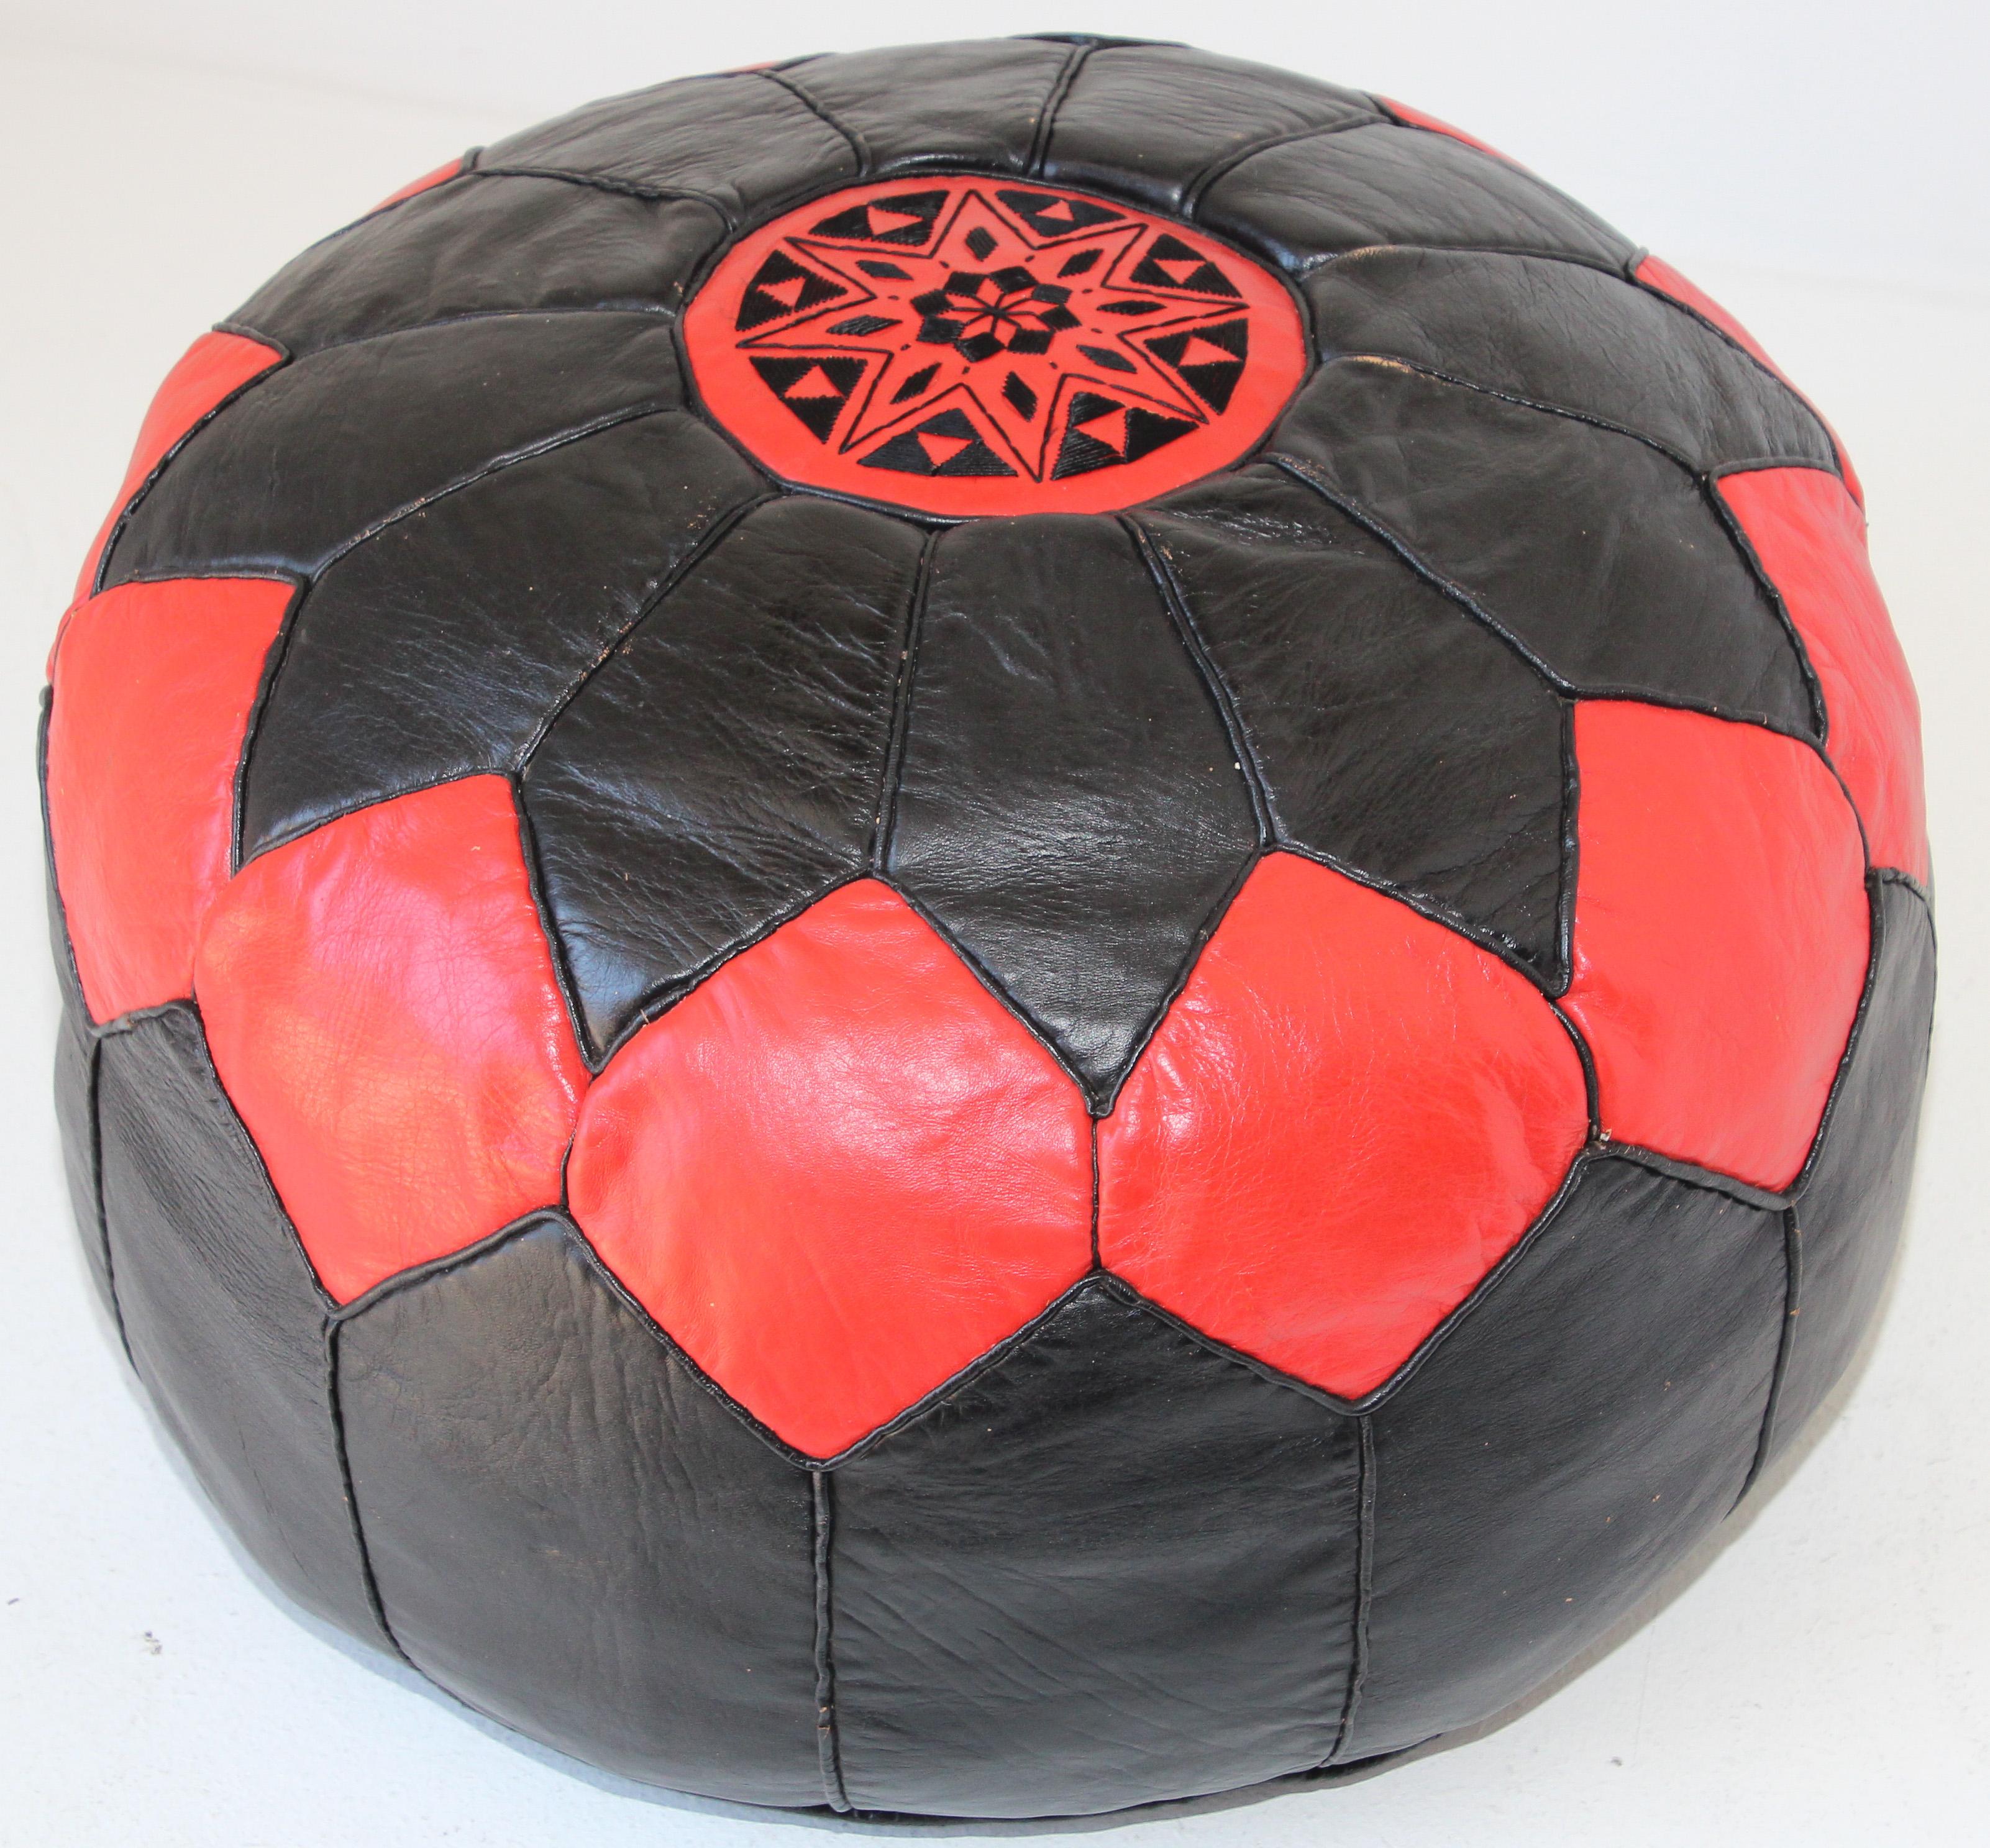 Vintage Moroccan Leather Pouf Hand-Tooled in Marrakesh Red and Black For Sale 3